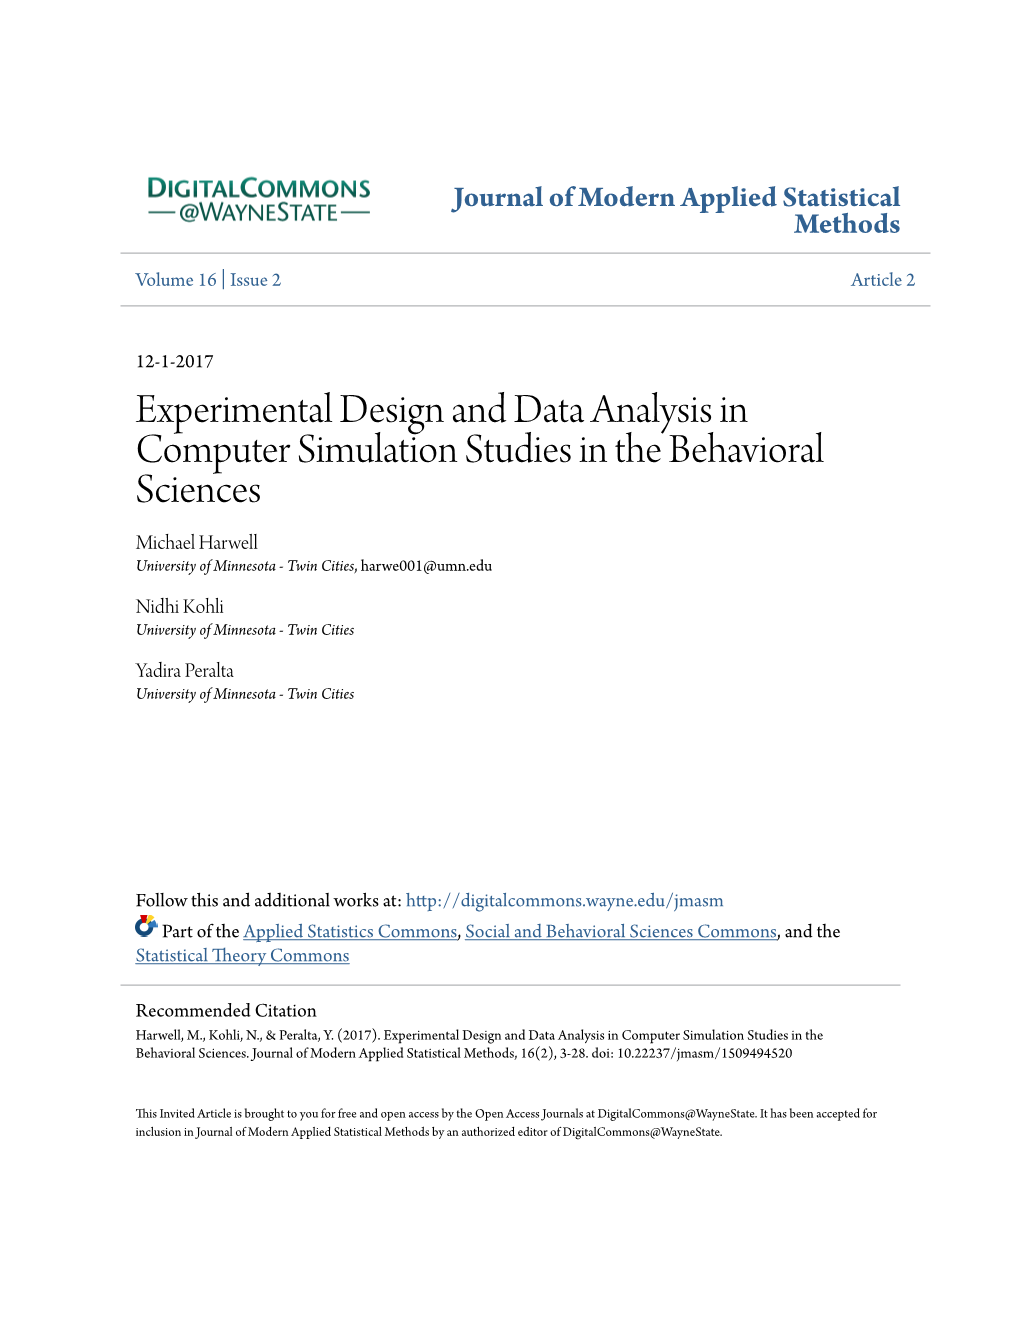 Experimental Design and Data Analysis in Computer Simulation